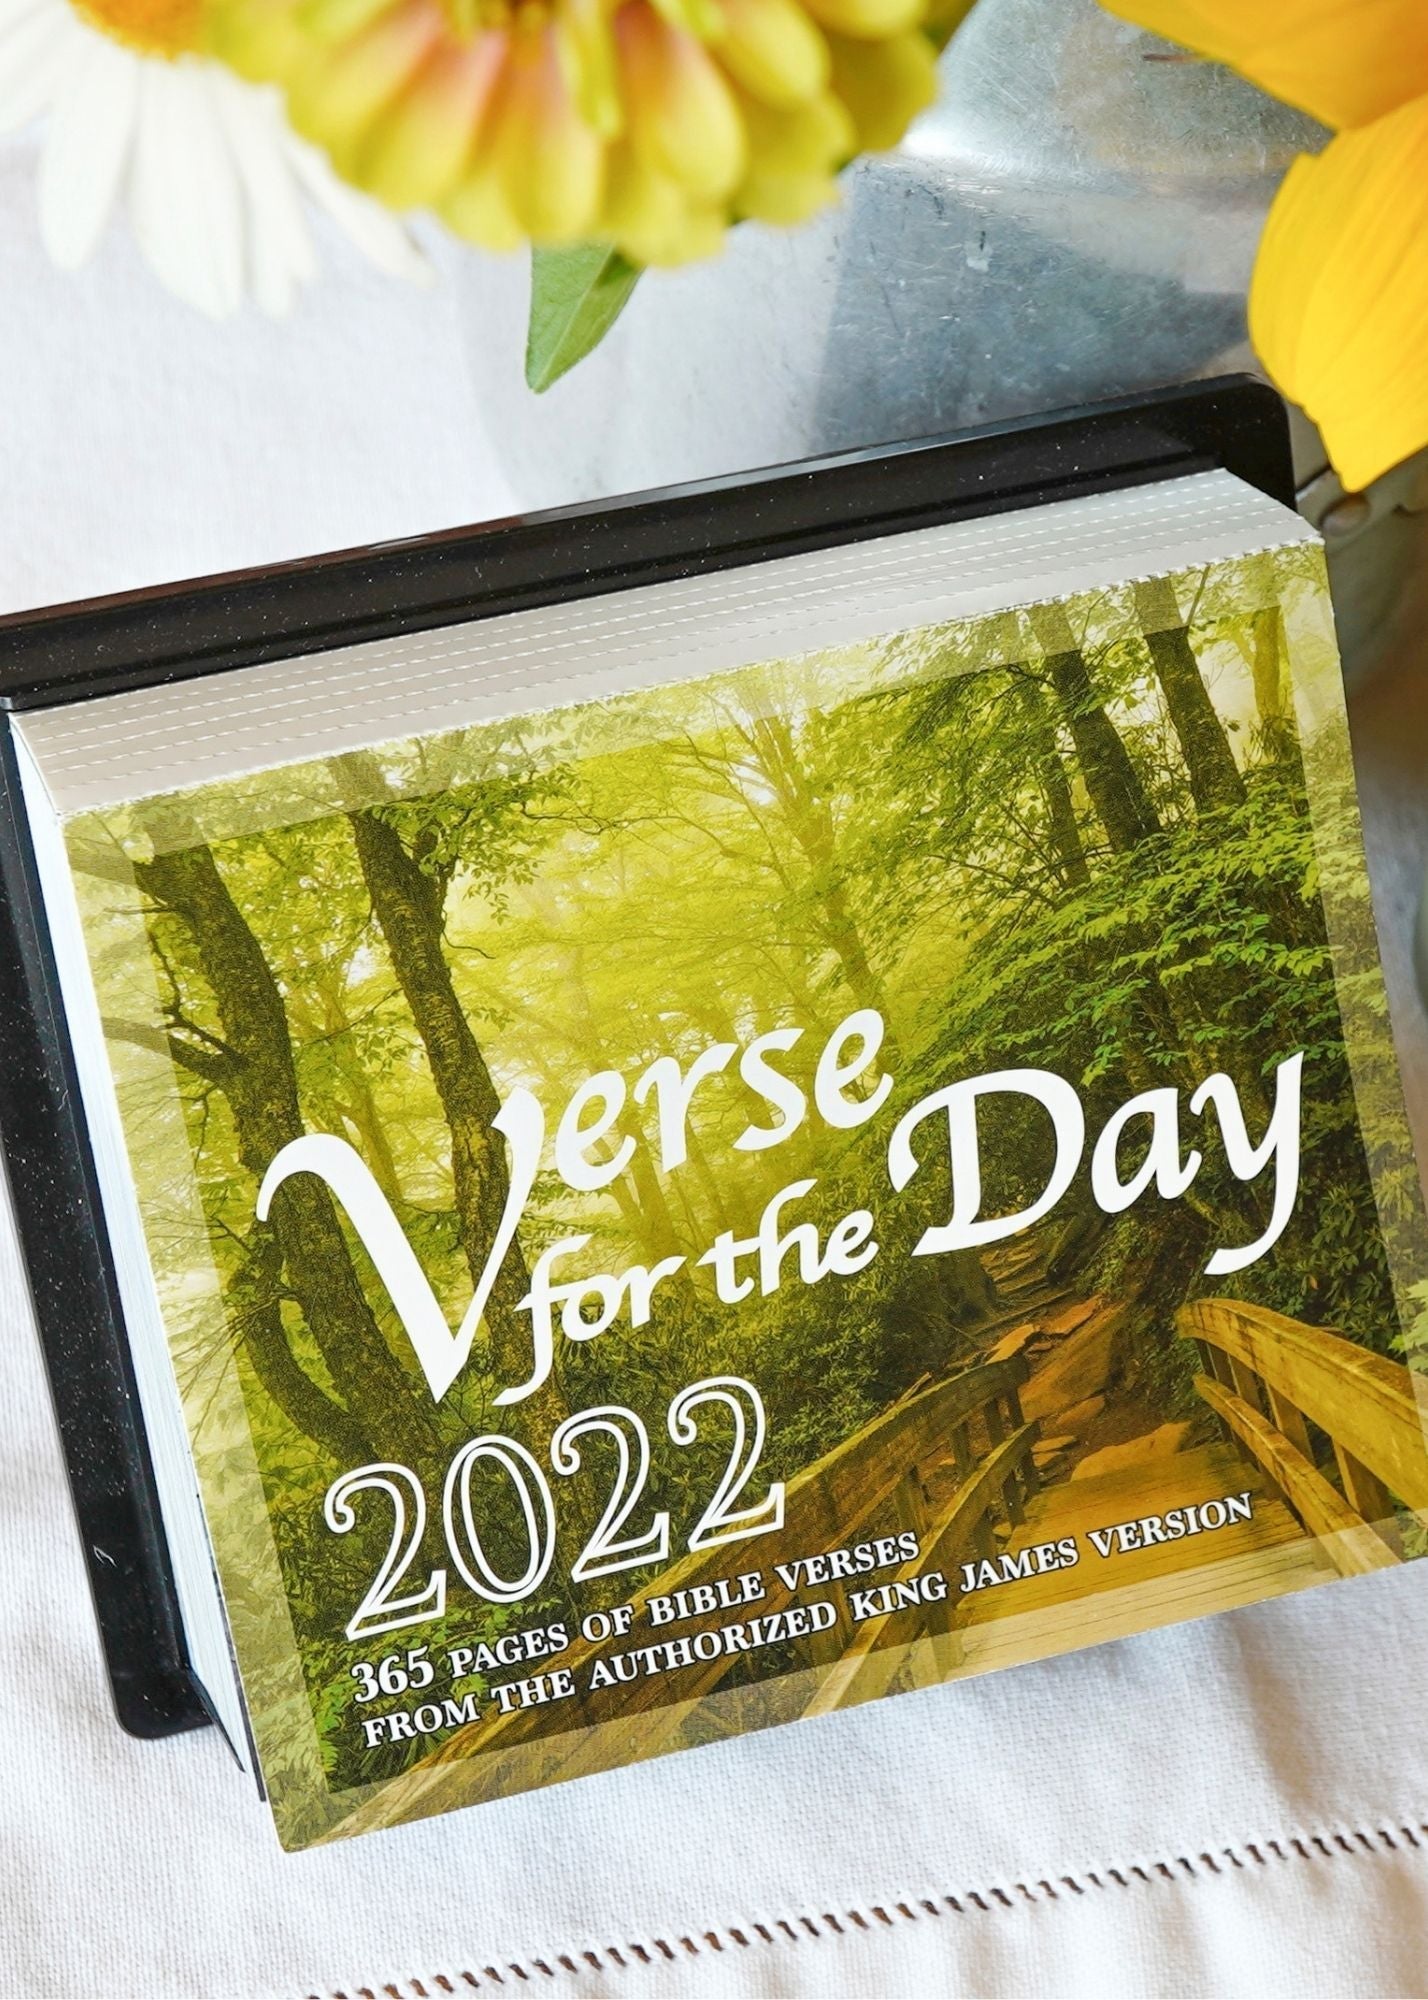 Verse of the Day KJV 2022 Calendar-FINAL SALE Home & Lifestyle Mustard Seed Messages